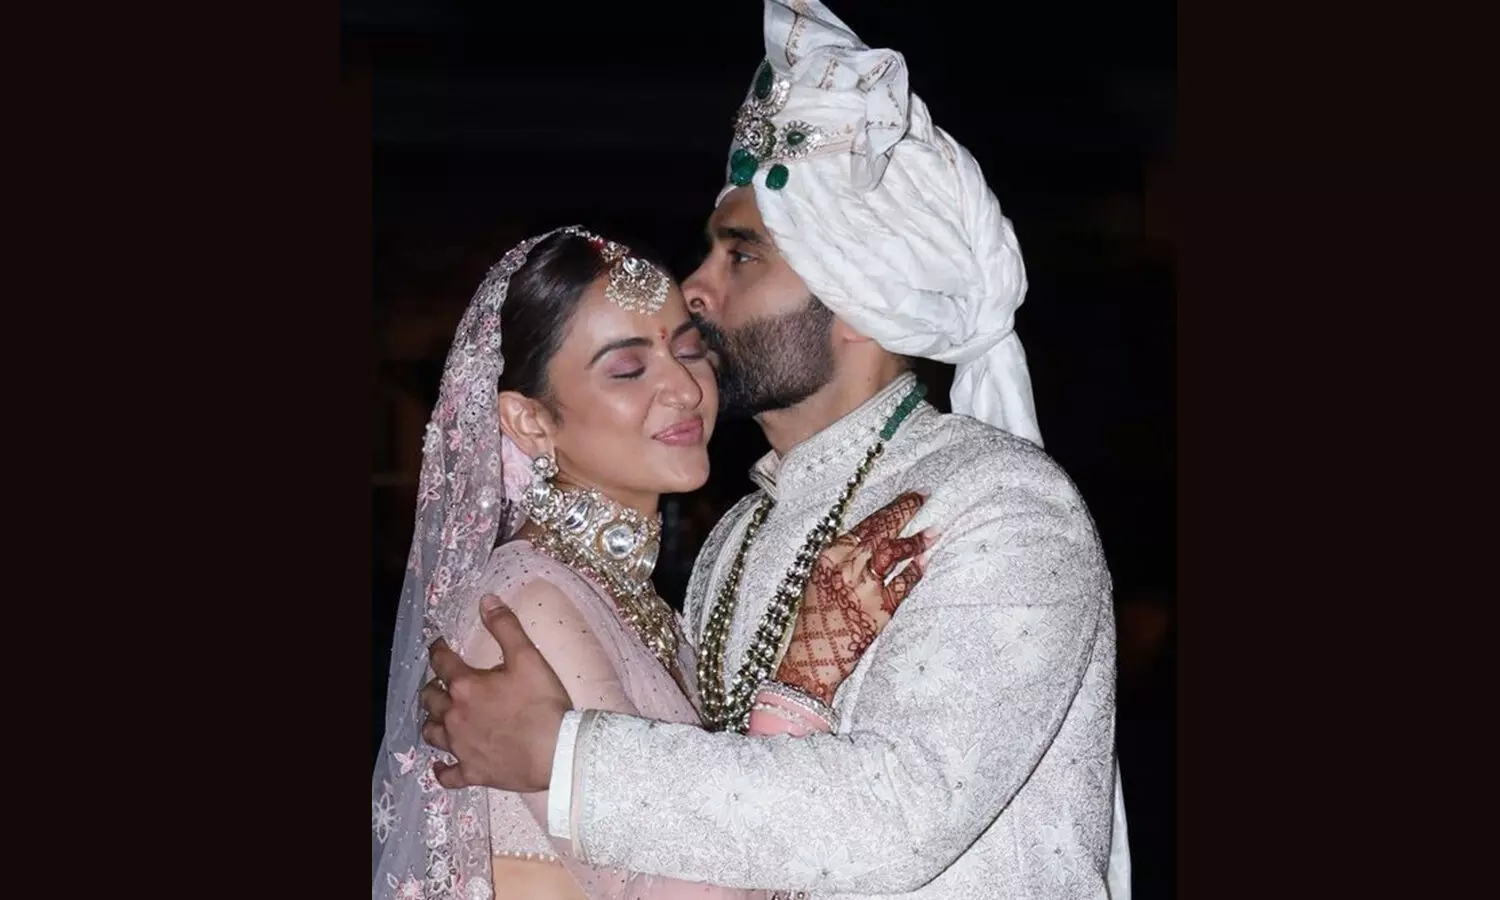 Jackky Bhagnani Kisses Rakul Preet After Their Dreamy Wedding, Check Out Their Lovely Moments with Paparazzi!